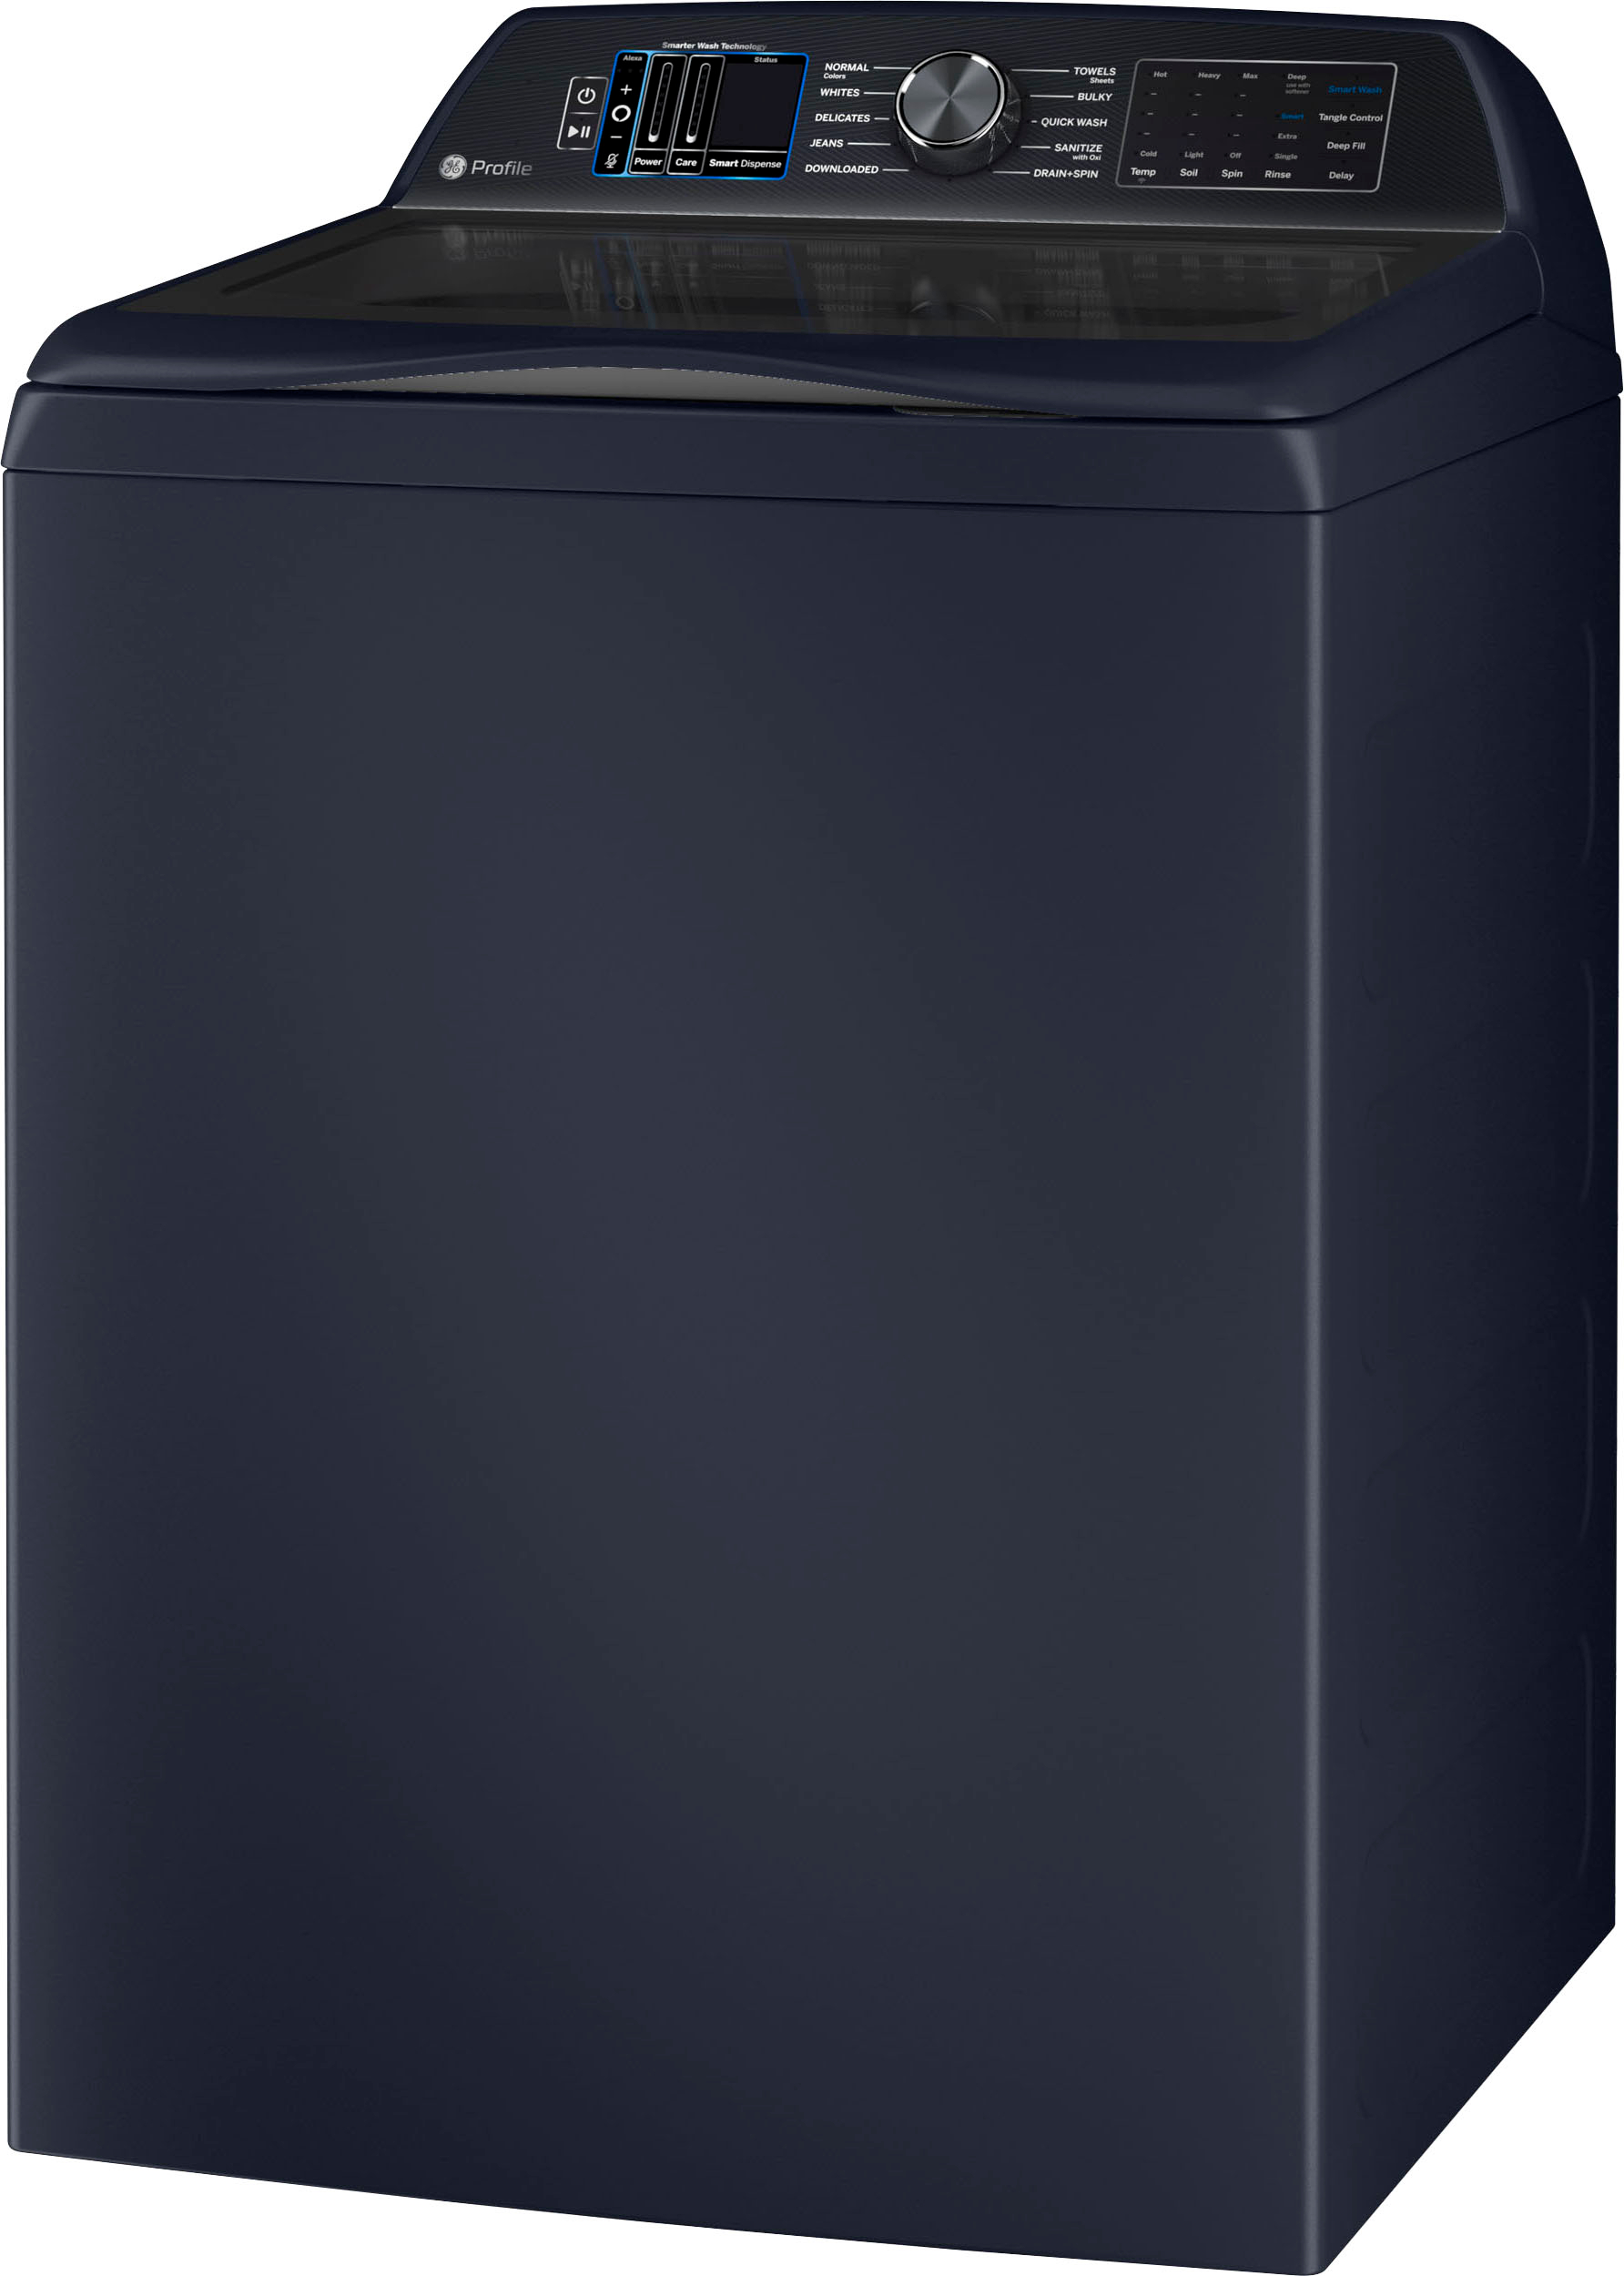 Left View: Whirlpool - 5.2 Cu. Ft. High Efficiency Smart Top Load Washer with 2 in 1 Removable Agitator - Chrome shadow